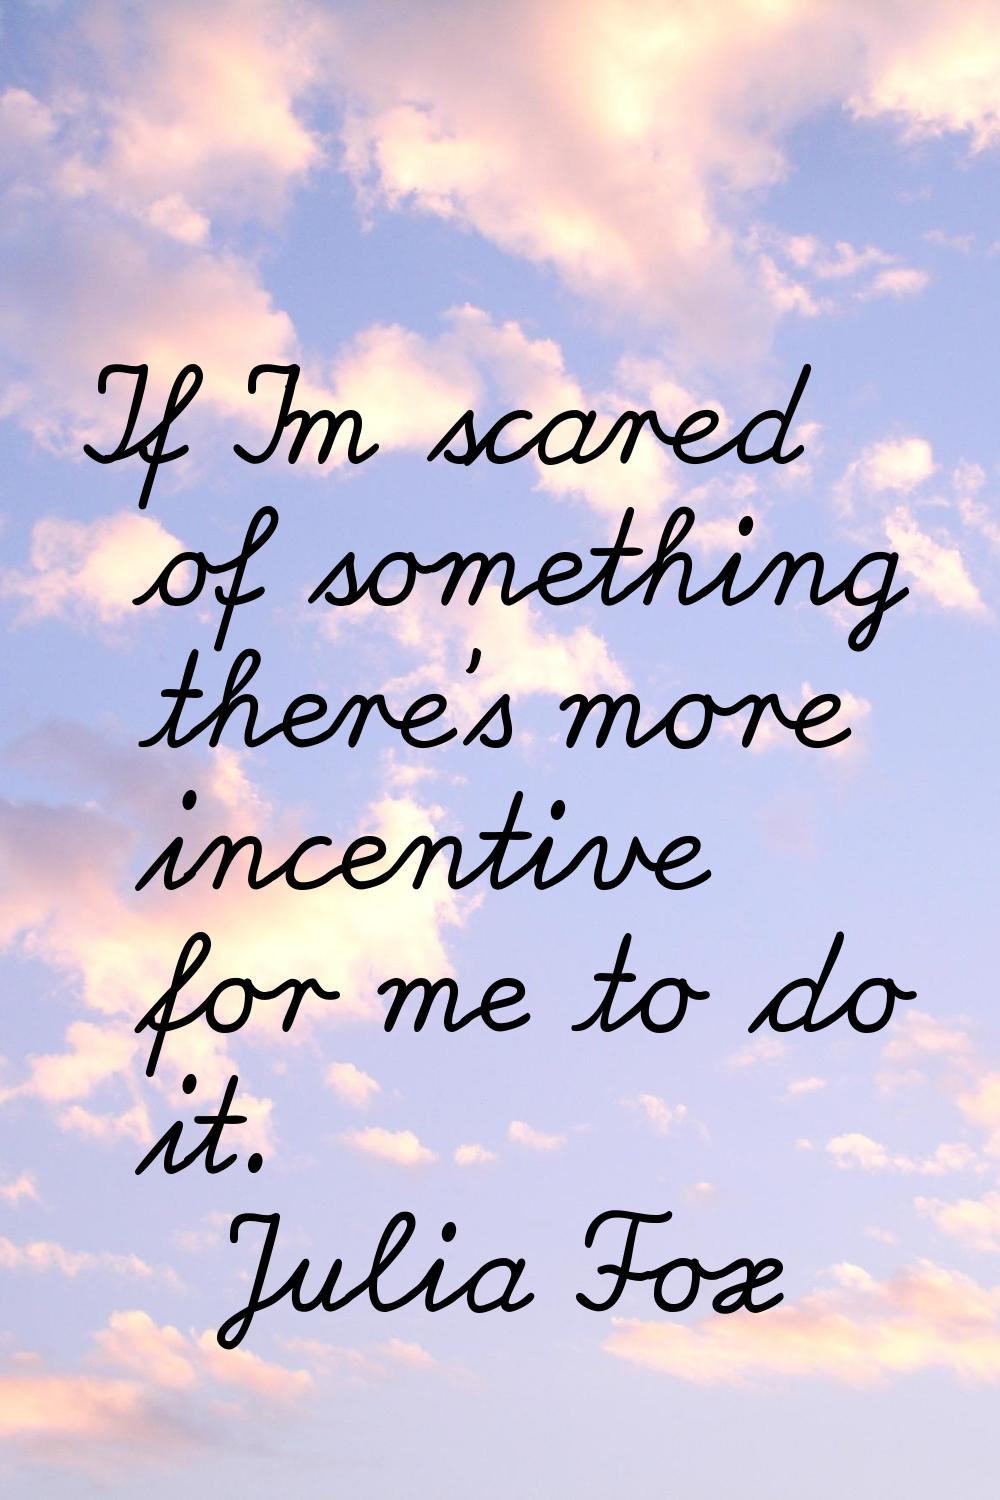 If I'm scared of something there's more incentive for me to do it.